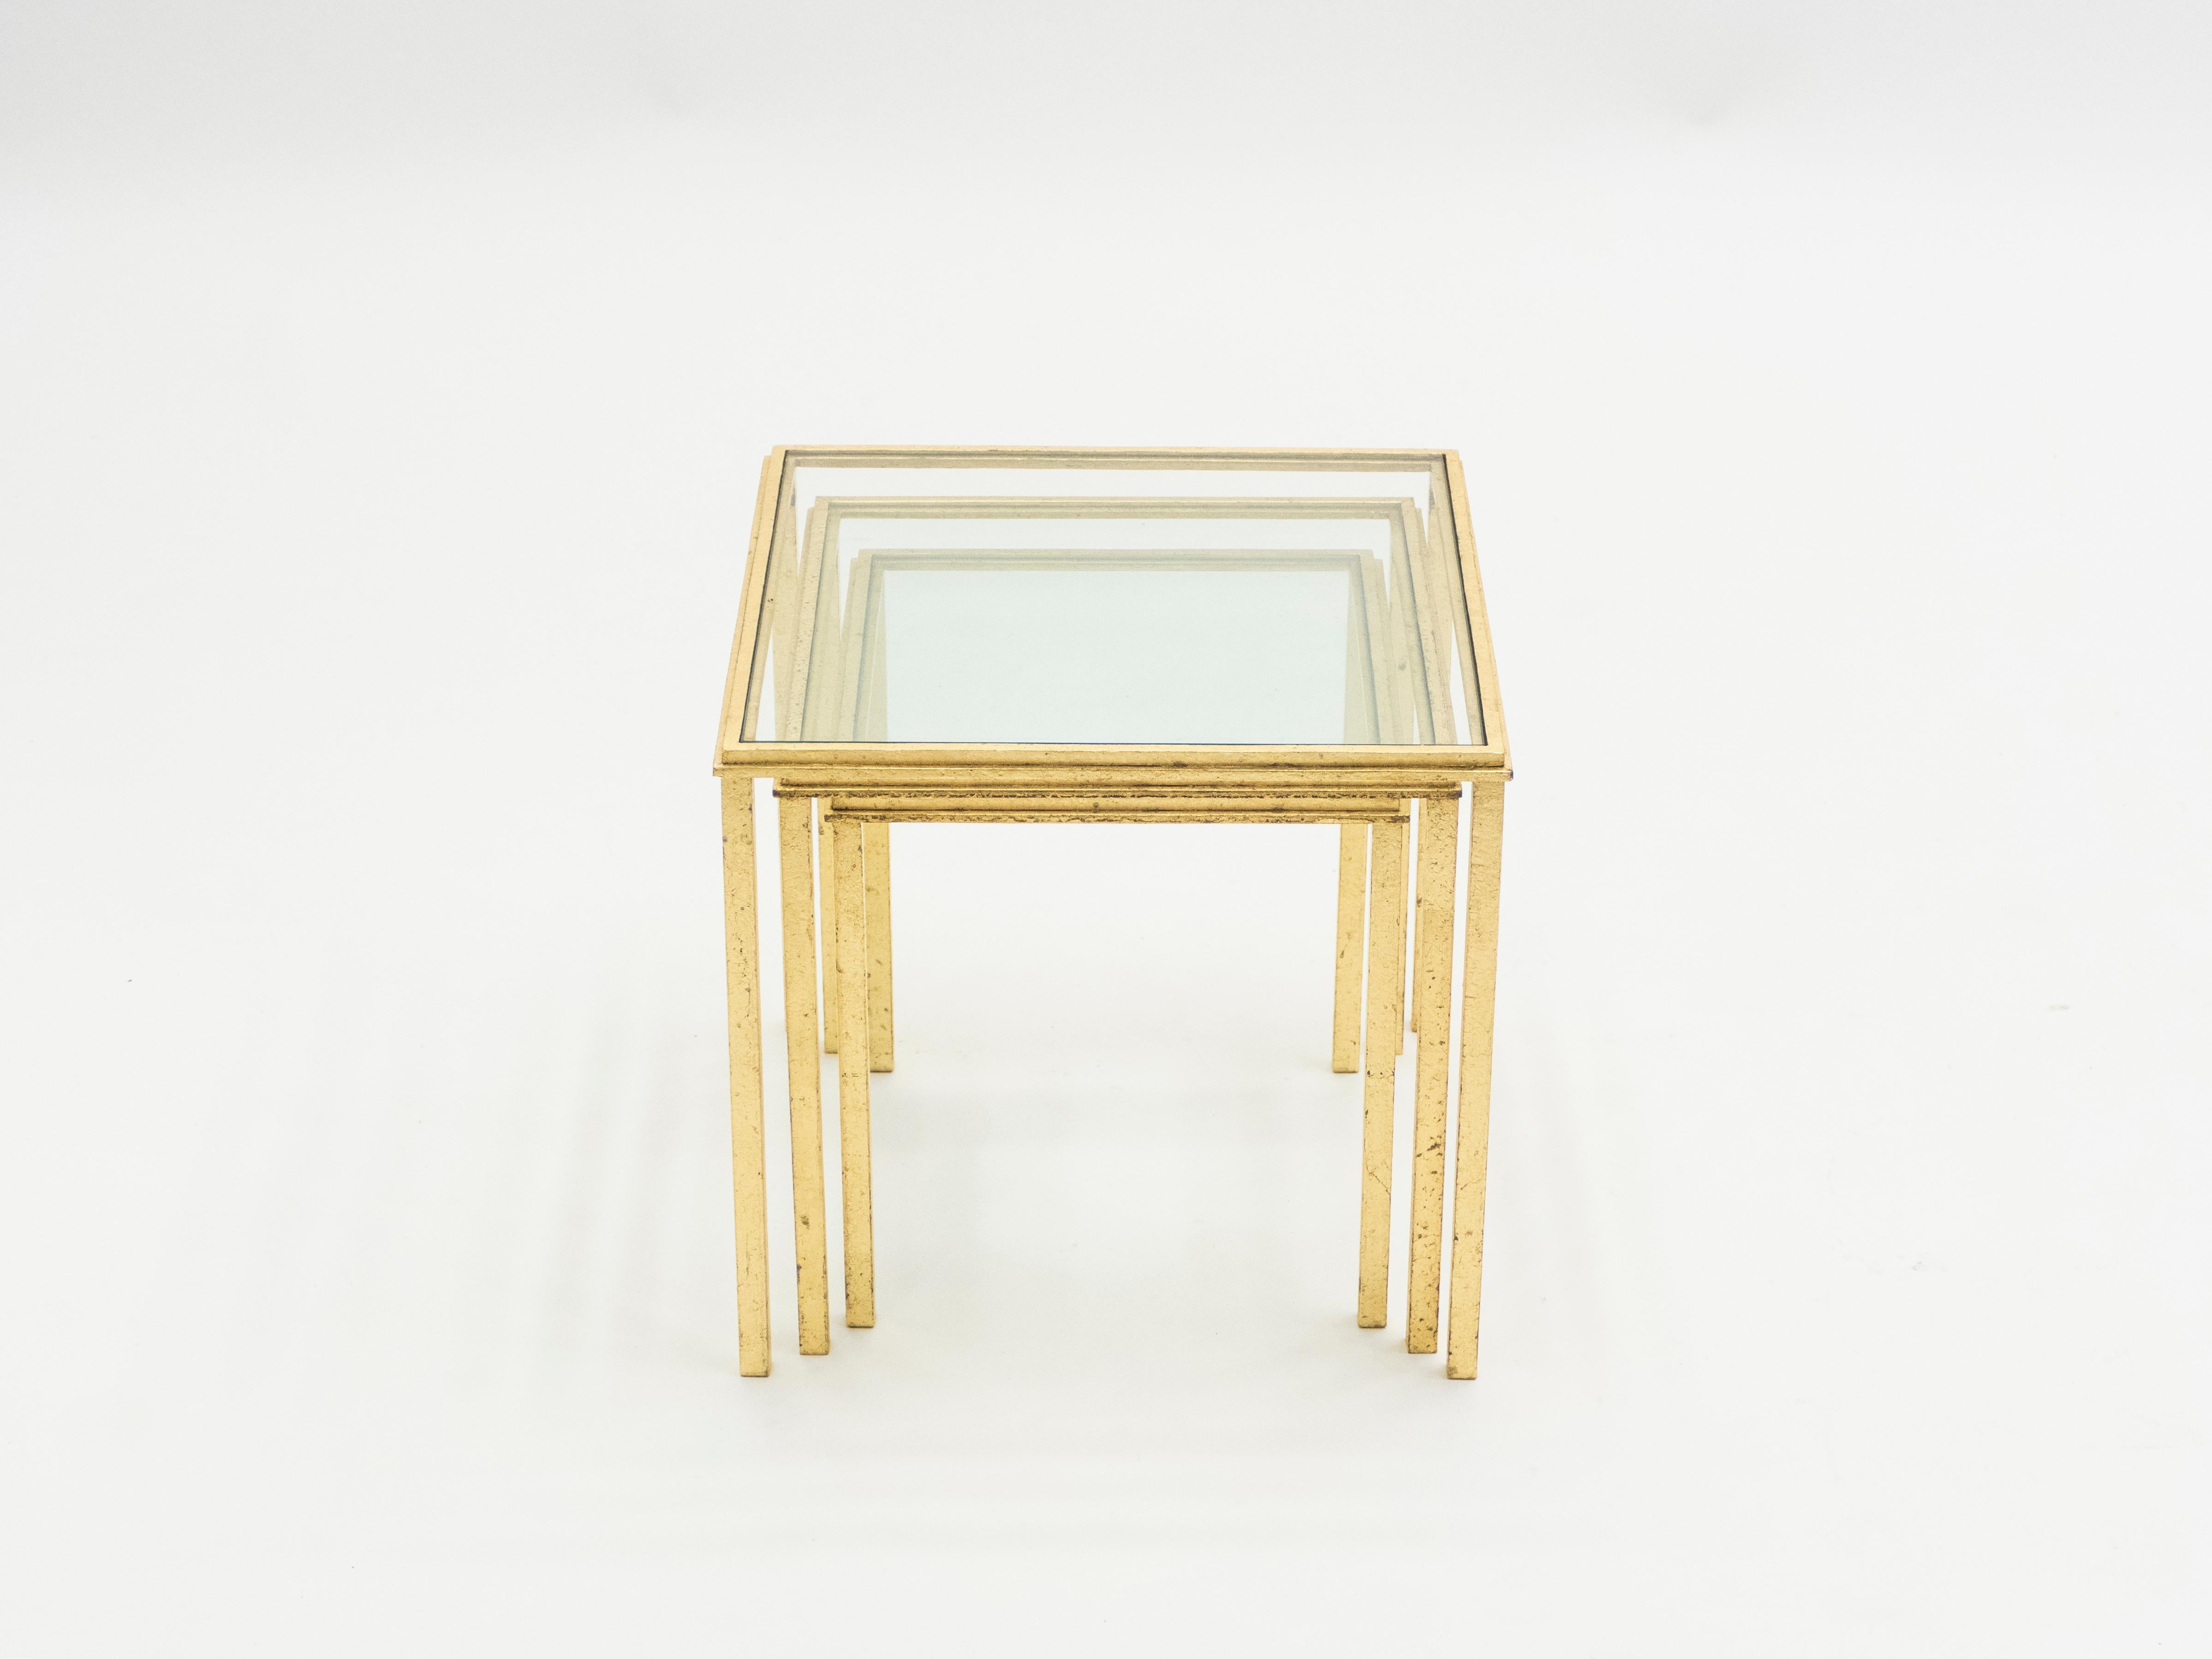 French Midcentury Roger Thibier Gilt Wrought Iron Gold Leaf Nesting Tables, 1960s For Sale